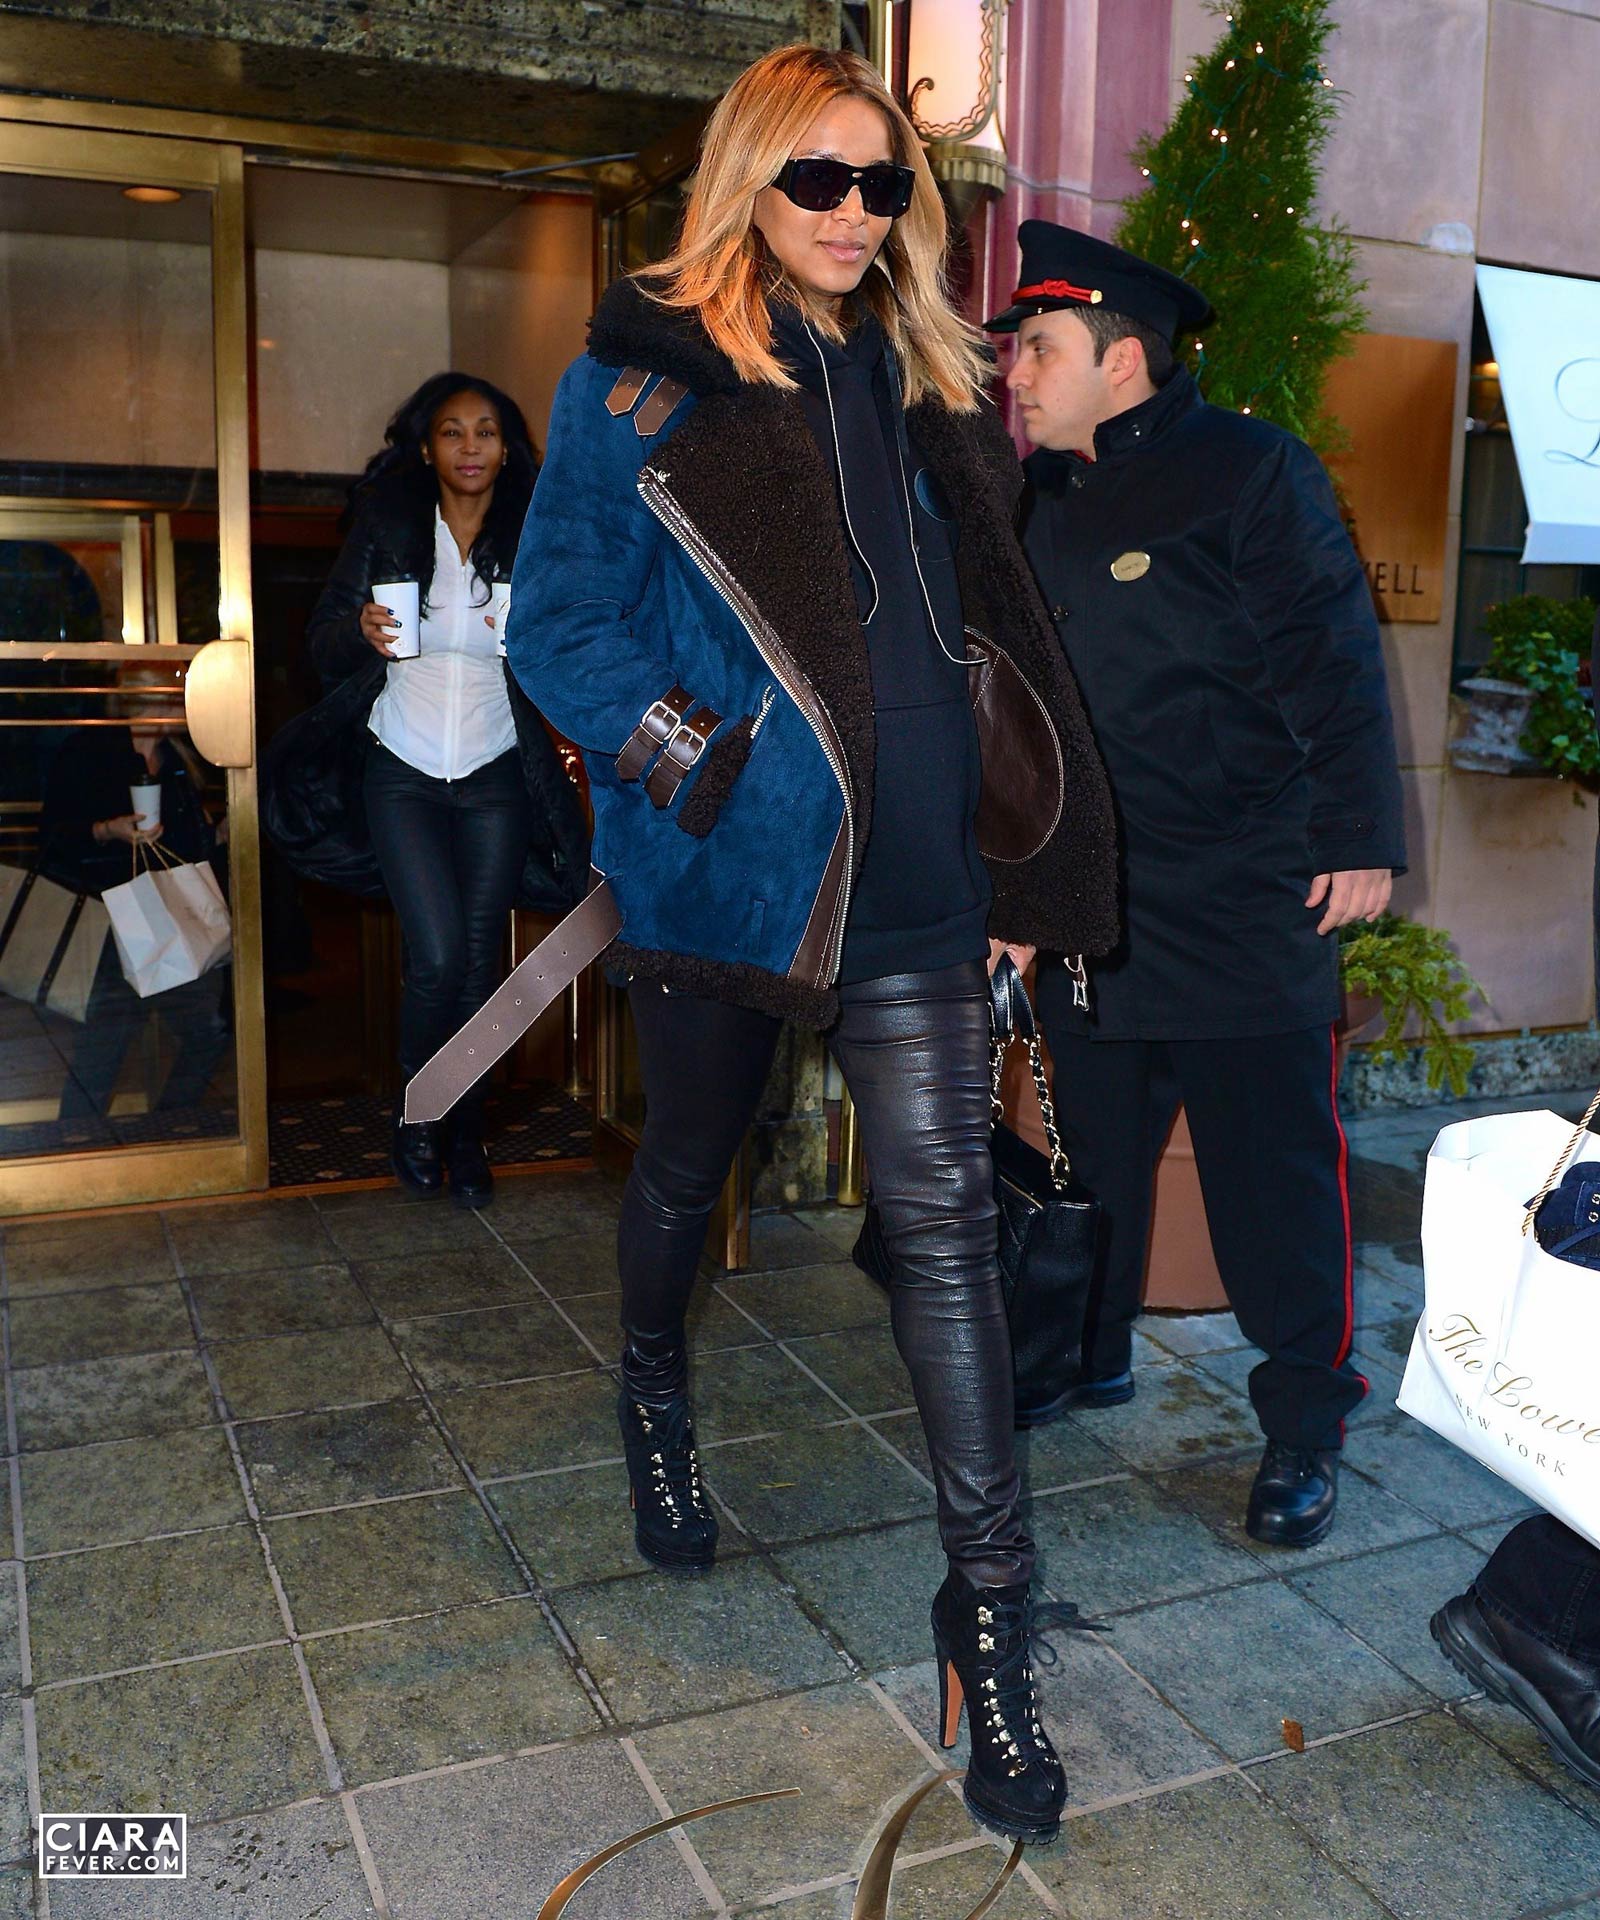 Ciara heads to the airport in New York City